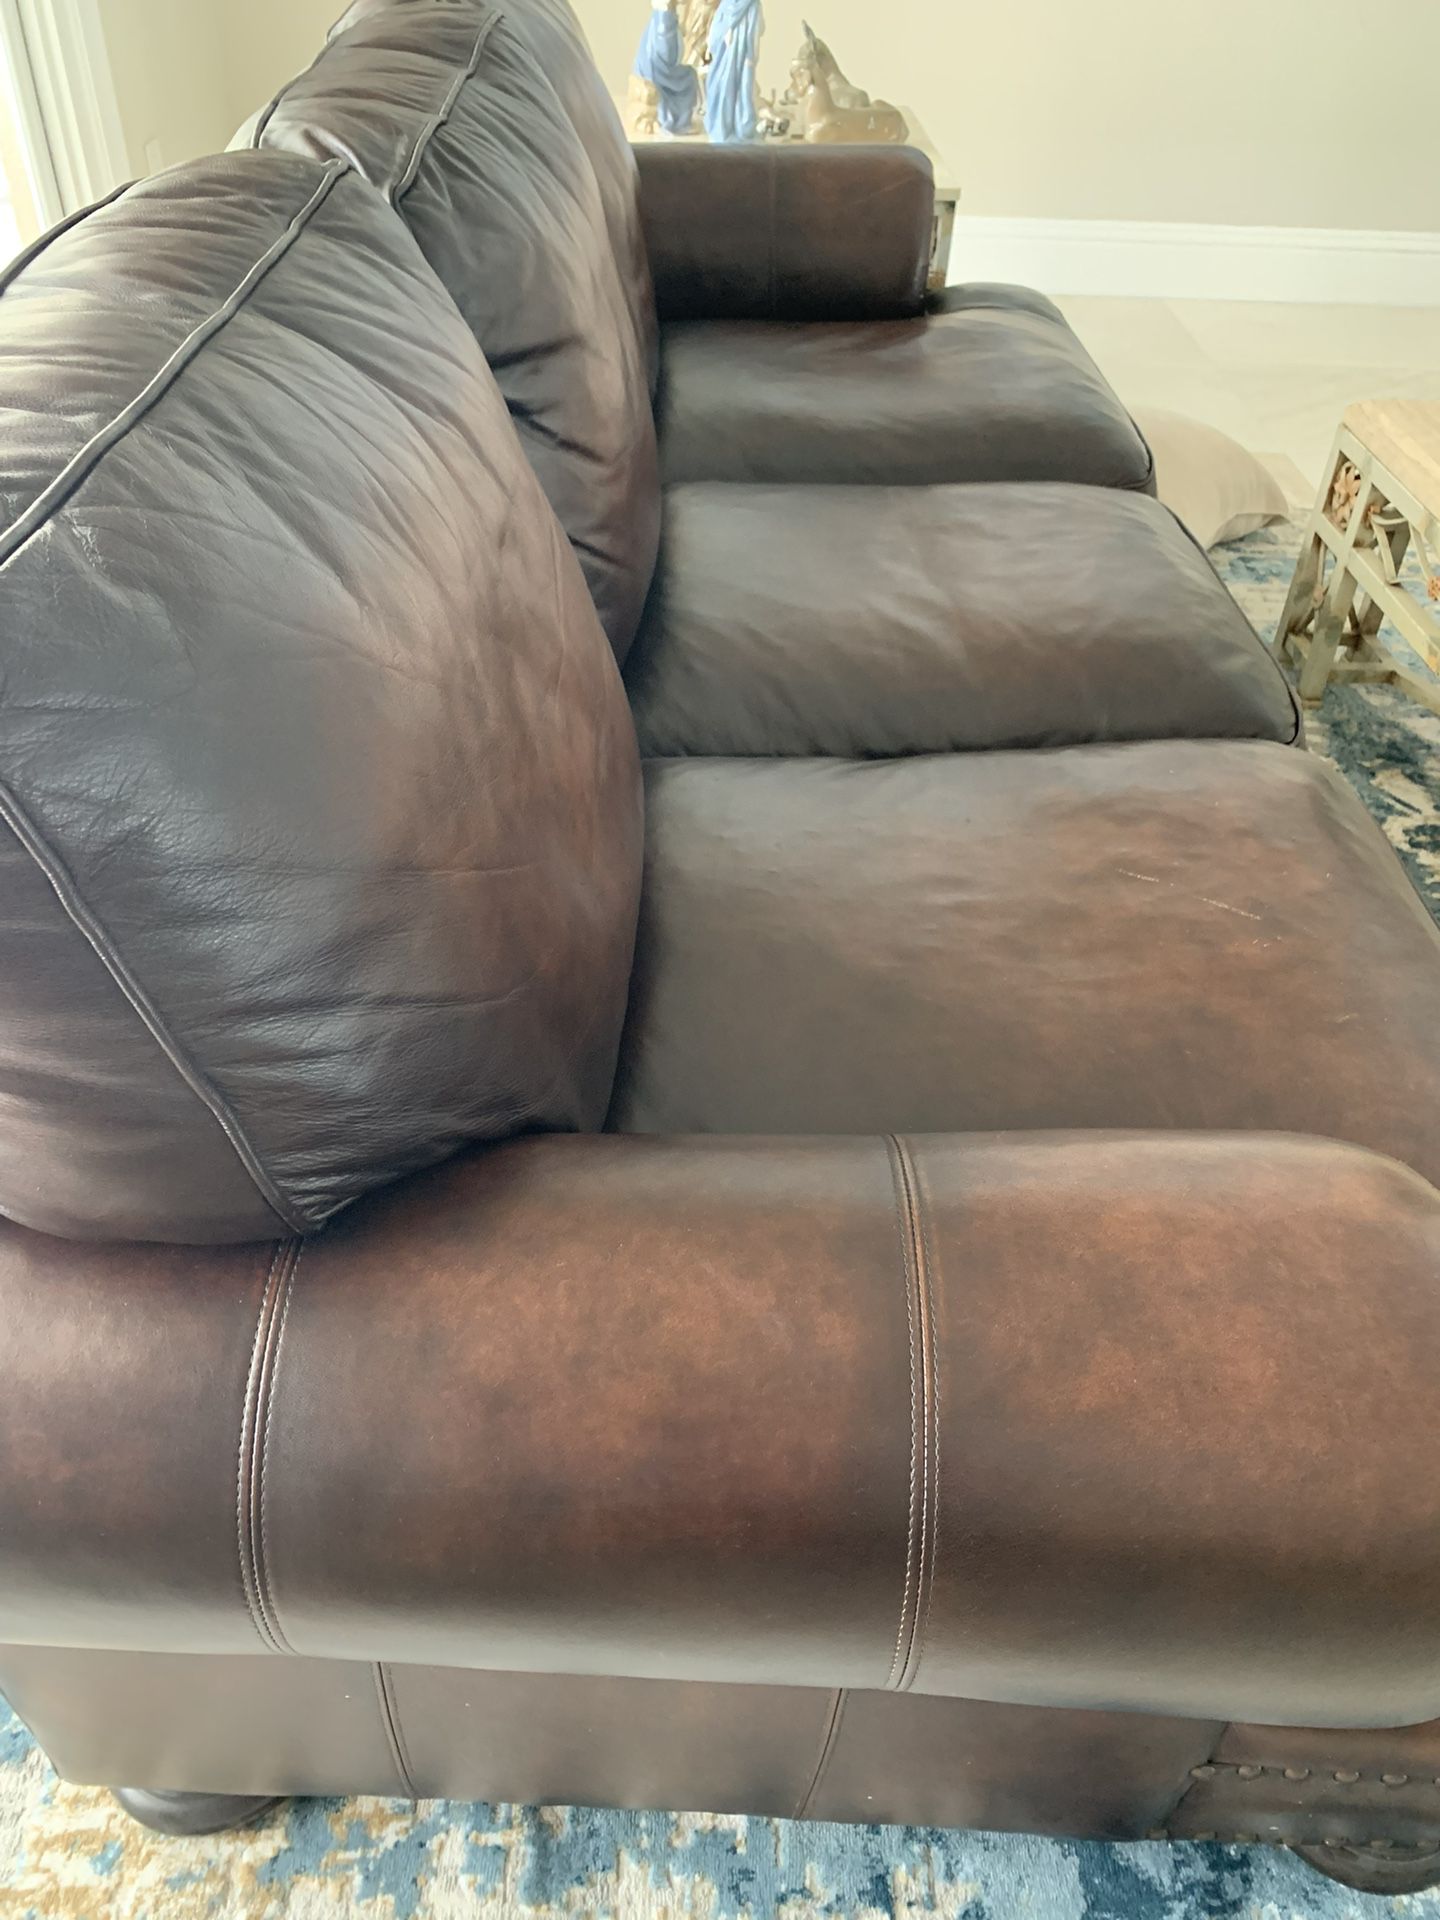 Bernhardt Brown Leather Couch 